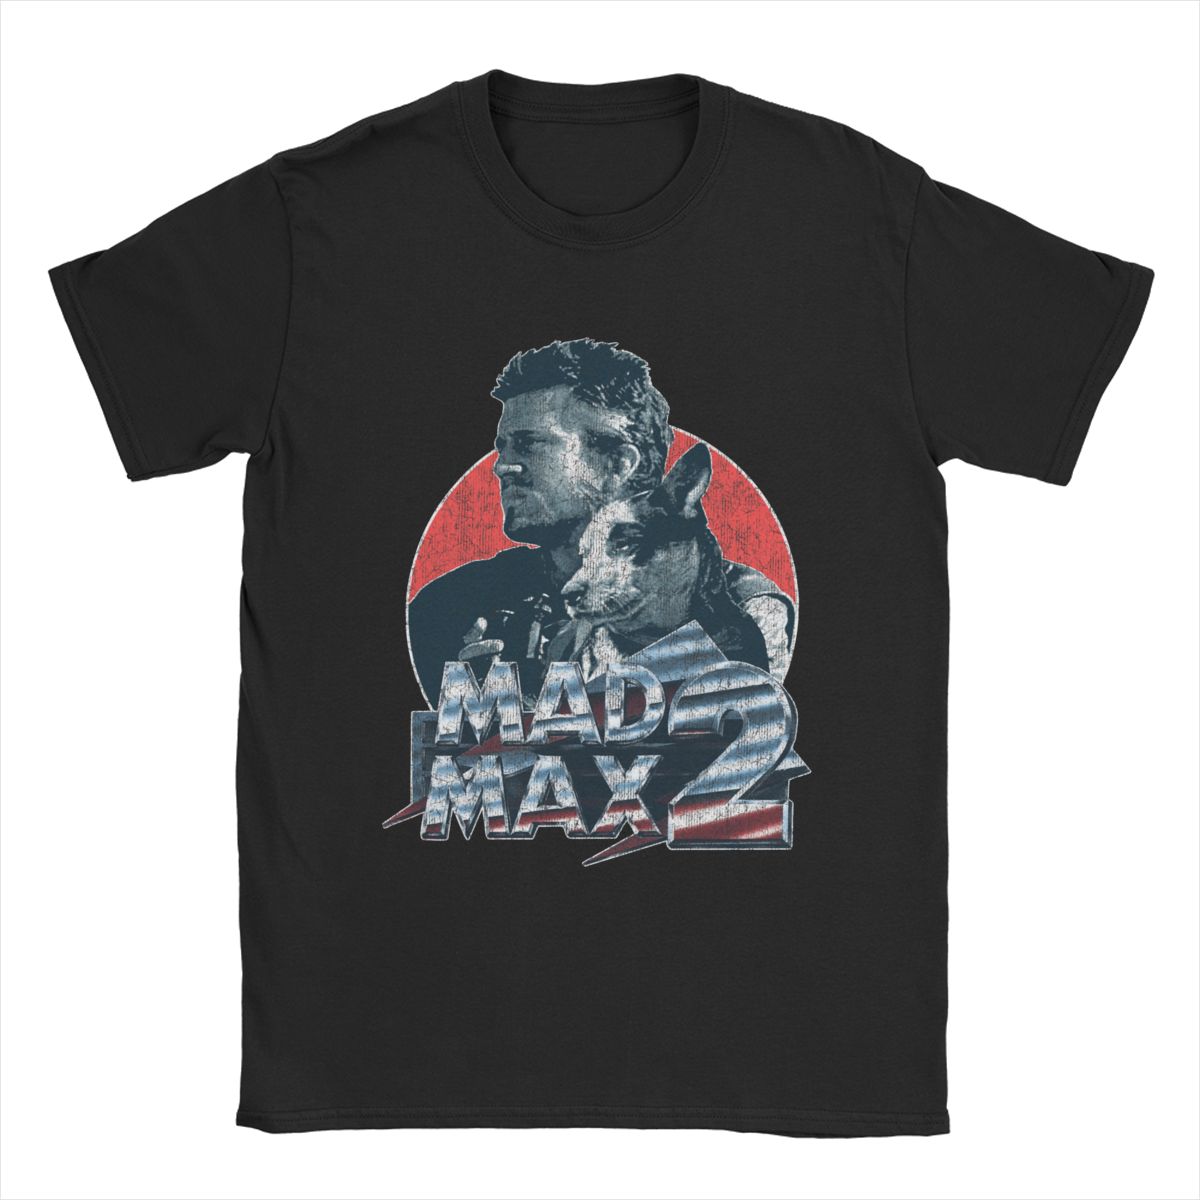 Mad Max - T-Shirt 100% Cotton - Classic 1980's Action - Movie Buff Fanwear-Black-S-